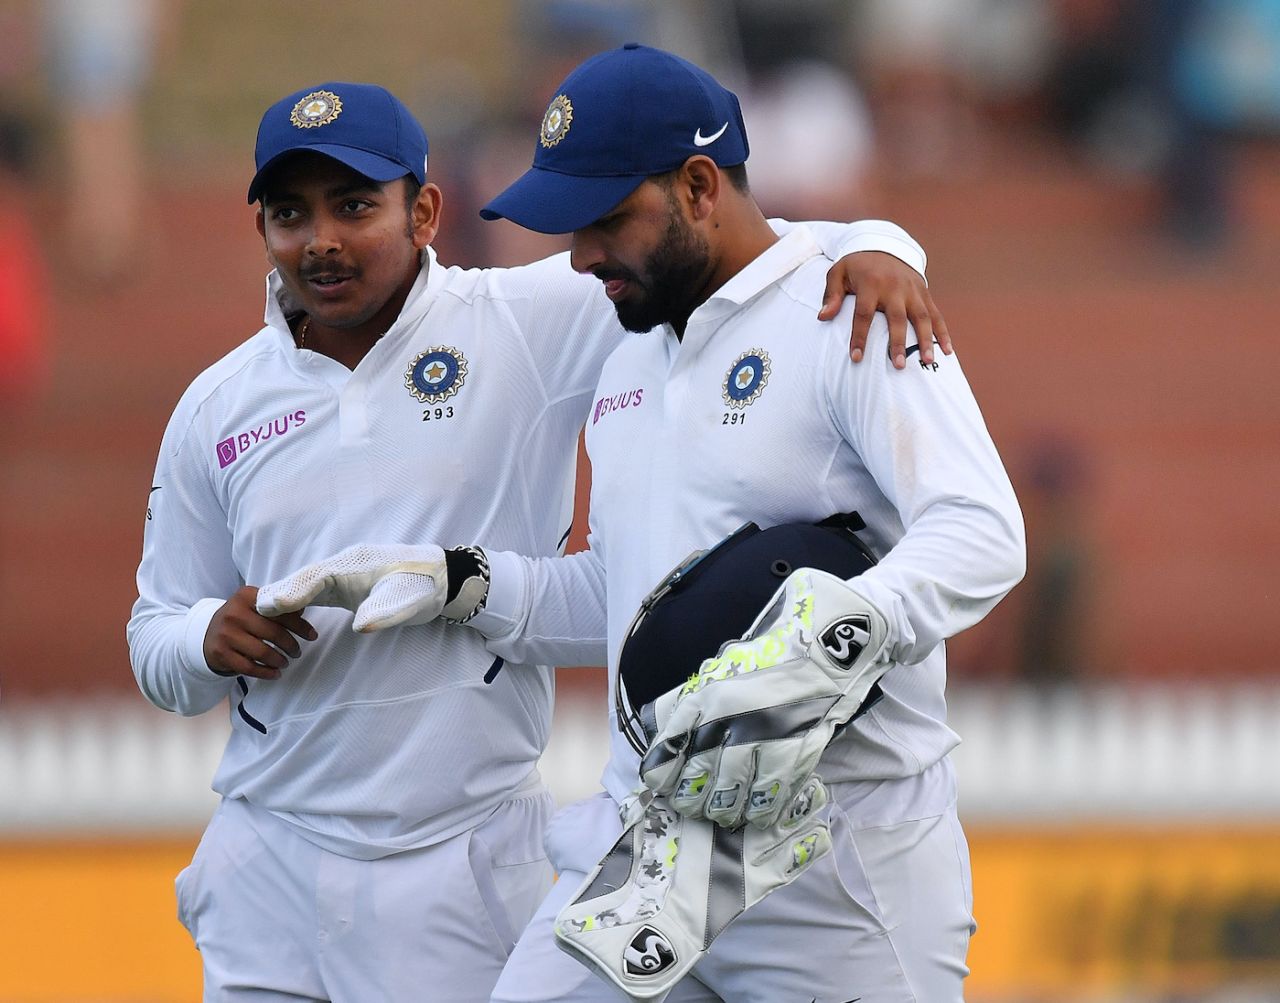 Prithvi Shaw and Rishabh Pant walk from the field at the end of day's play, day two, first Test, New Zealand vs India, Basin Reserve, Wellington, February 22, 2020